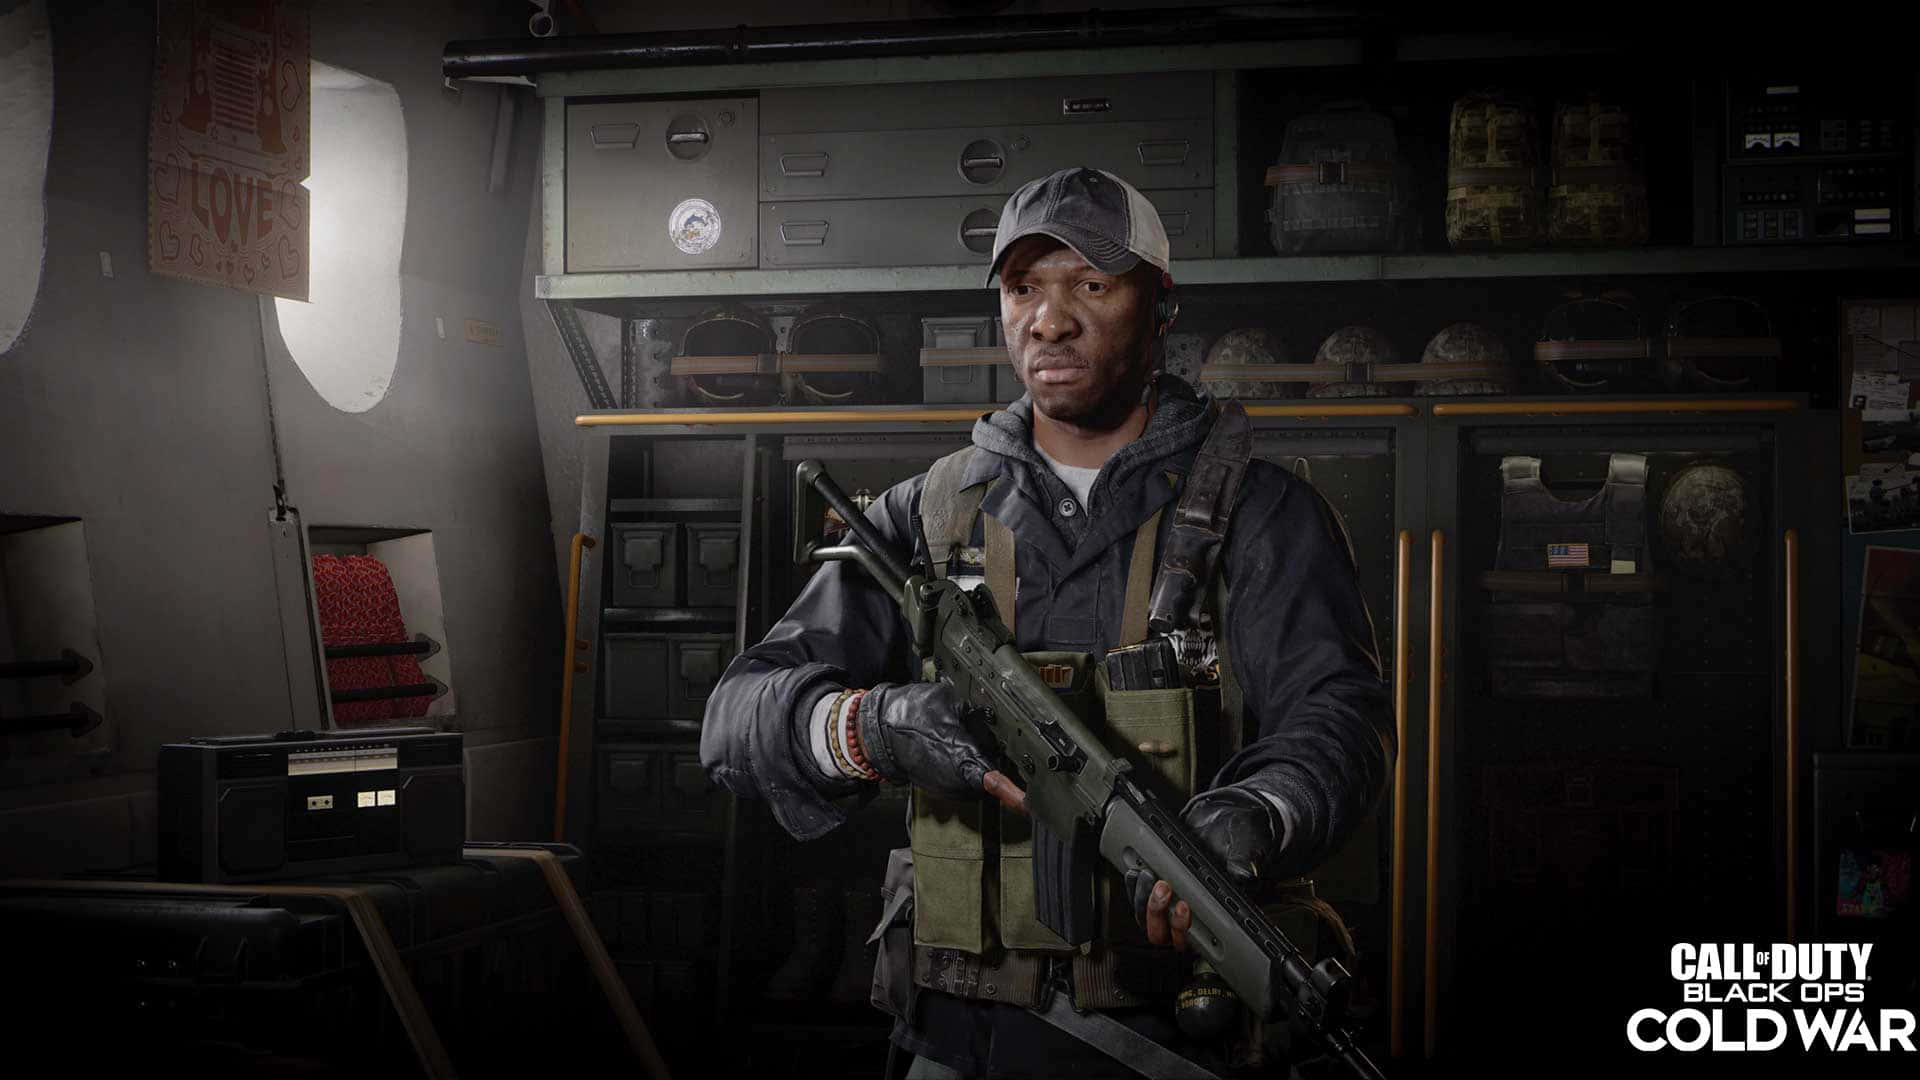 Battle the Cold War in the latest installment of Call of Duty: Black Ops Cold War